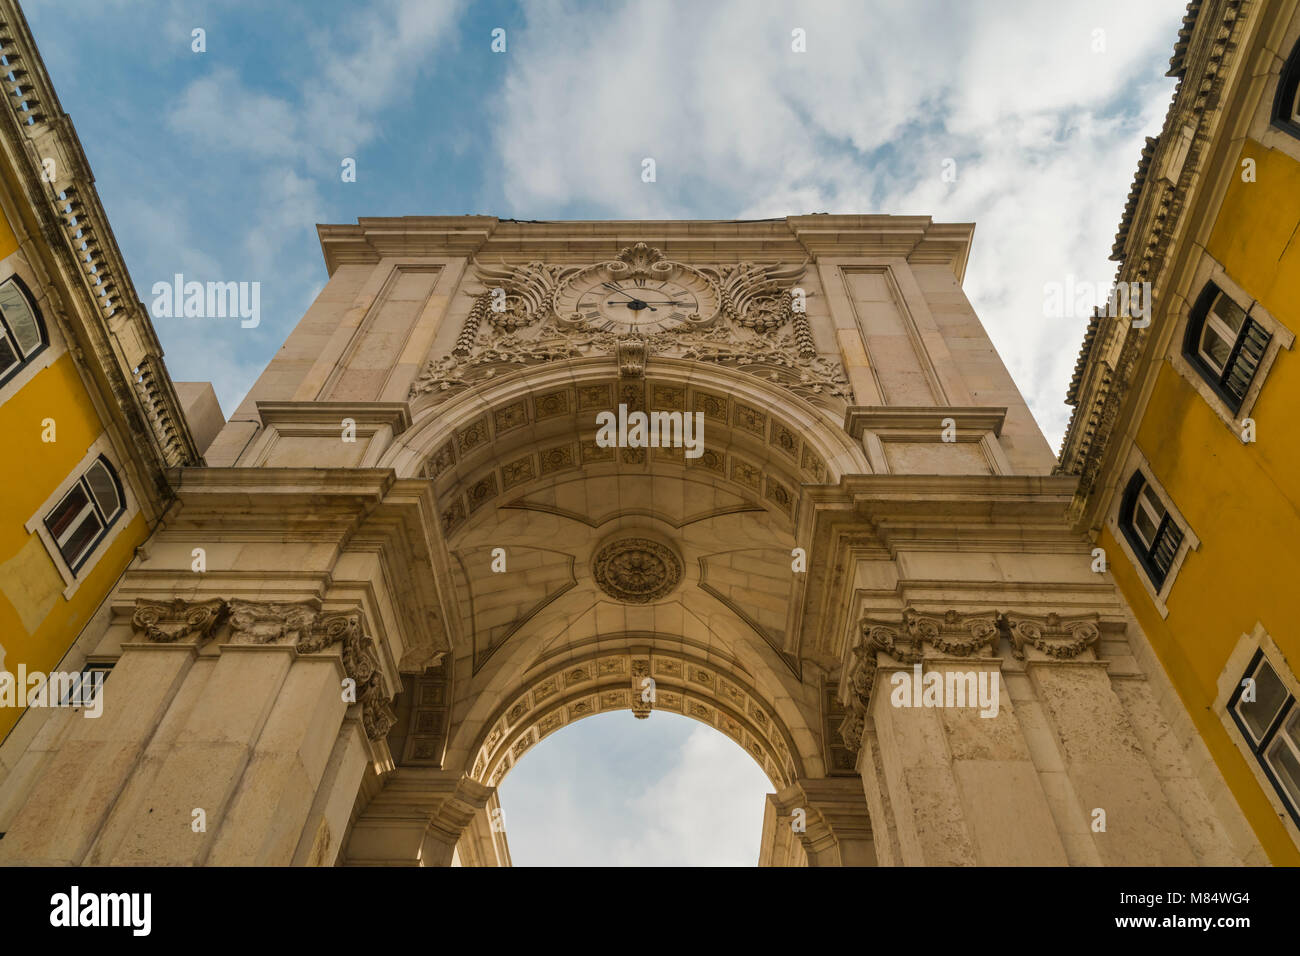 LISBON / PORTUGAL - FEBRUARY 17 2018: HISTORICAL ARCH IN CENTRE OF LISBON Stock Photo